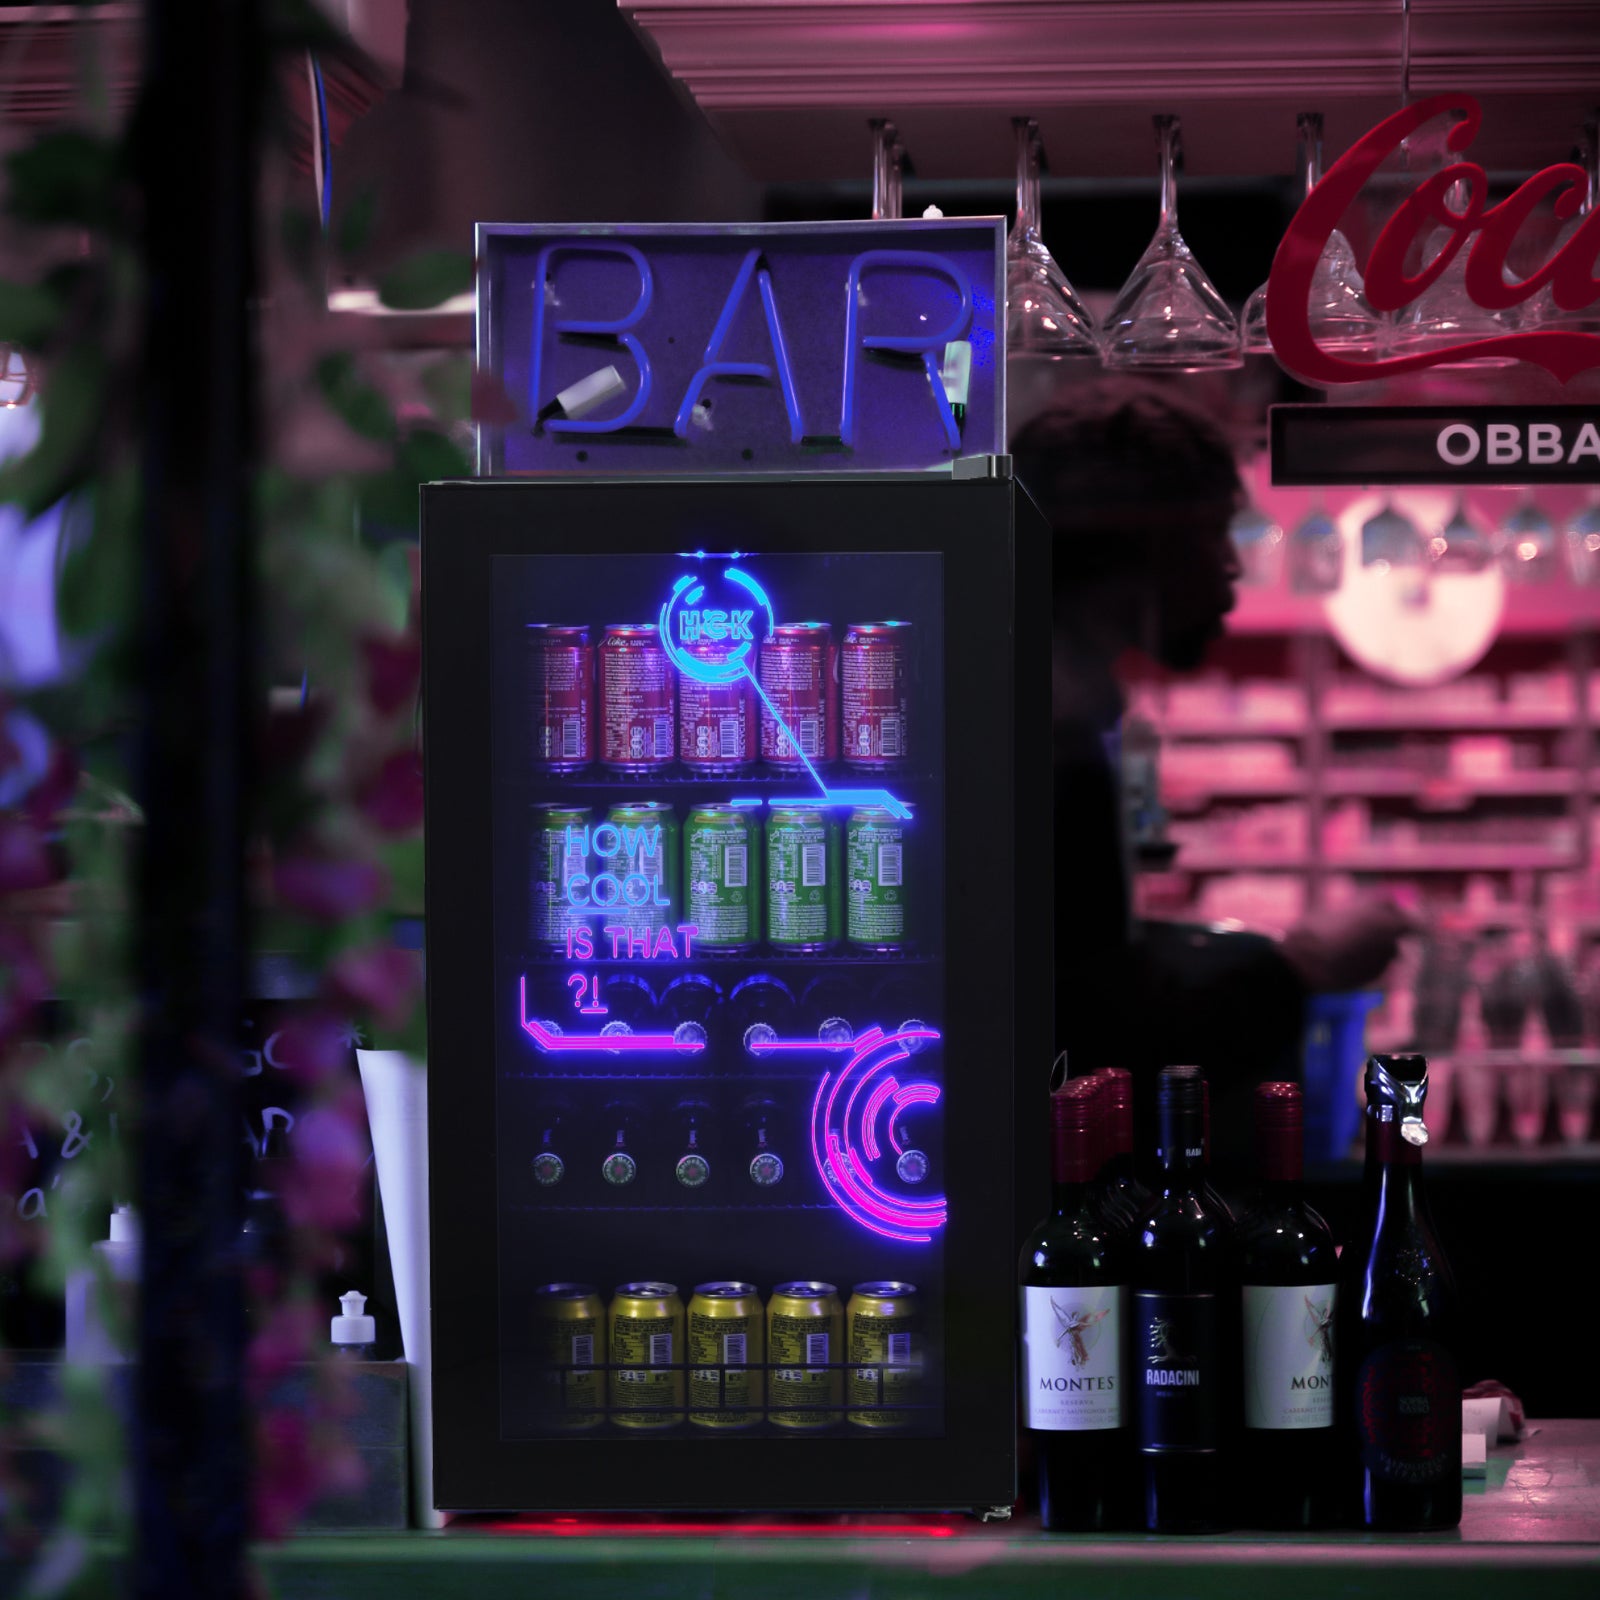 A 3.5 Cu Ft Cyberpunk Glass Door Beverage Fridge placed in a bar setup, positioned on a table beside bottles of wine